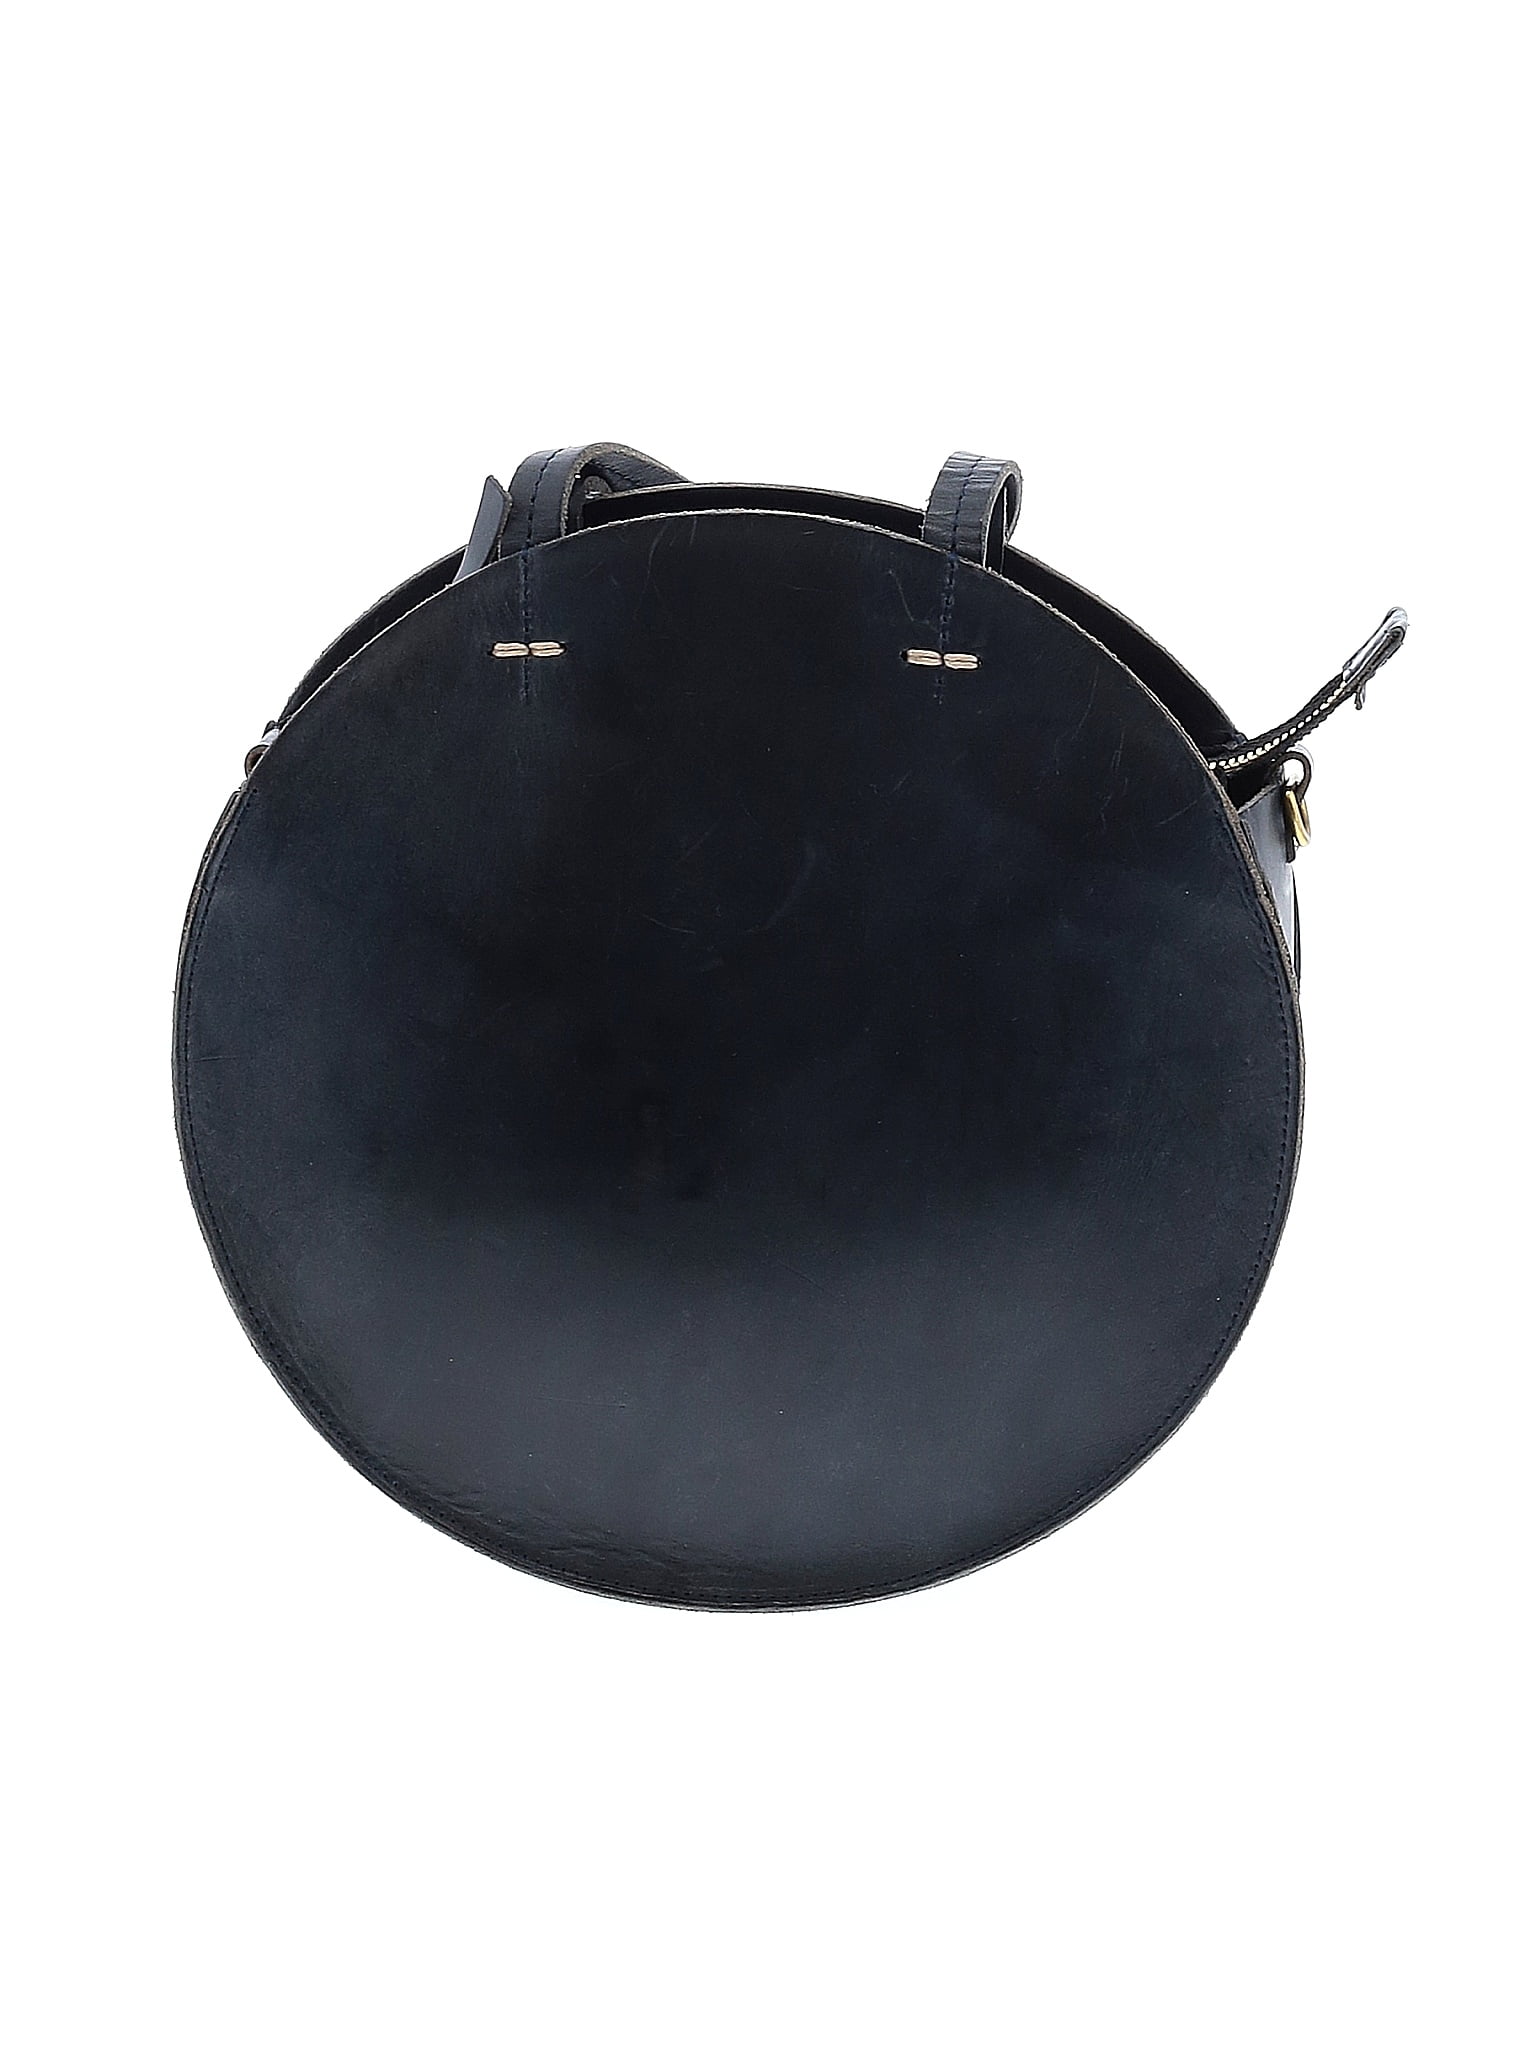 CLARE V ALISTAIR LARGE CIRCLE LEATHER BLACK BAG